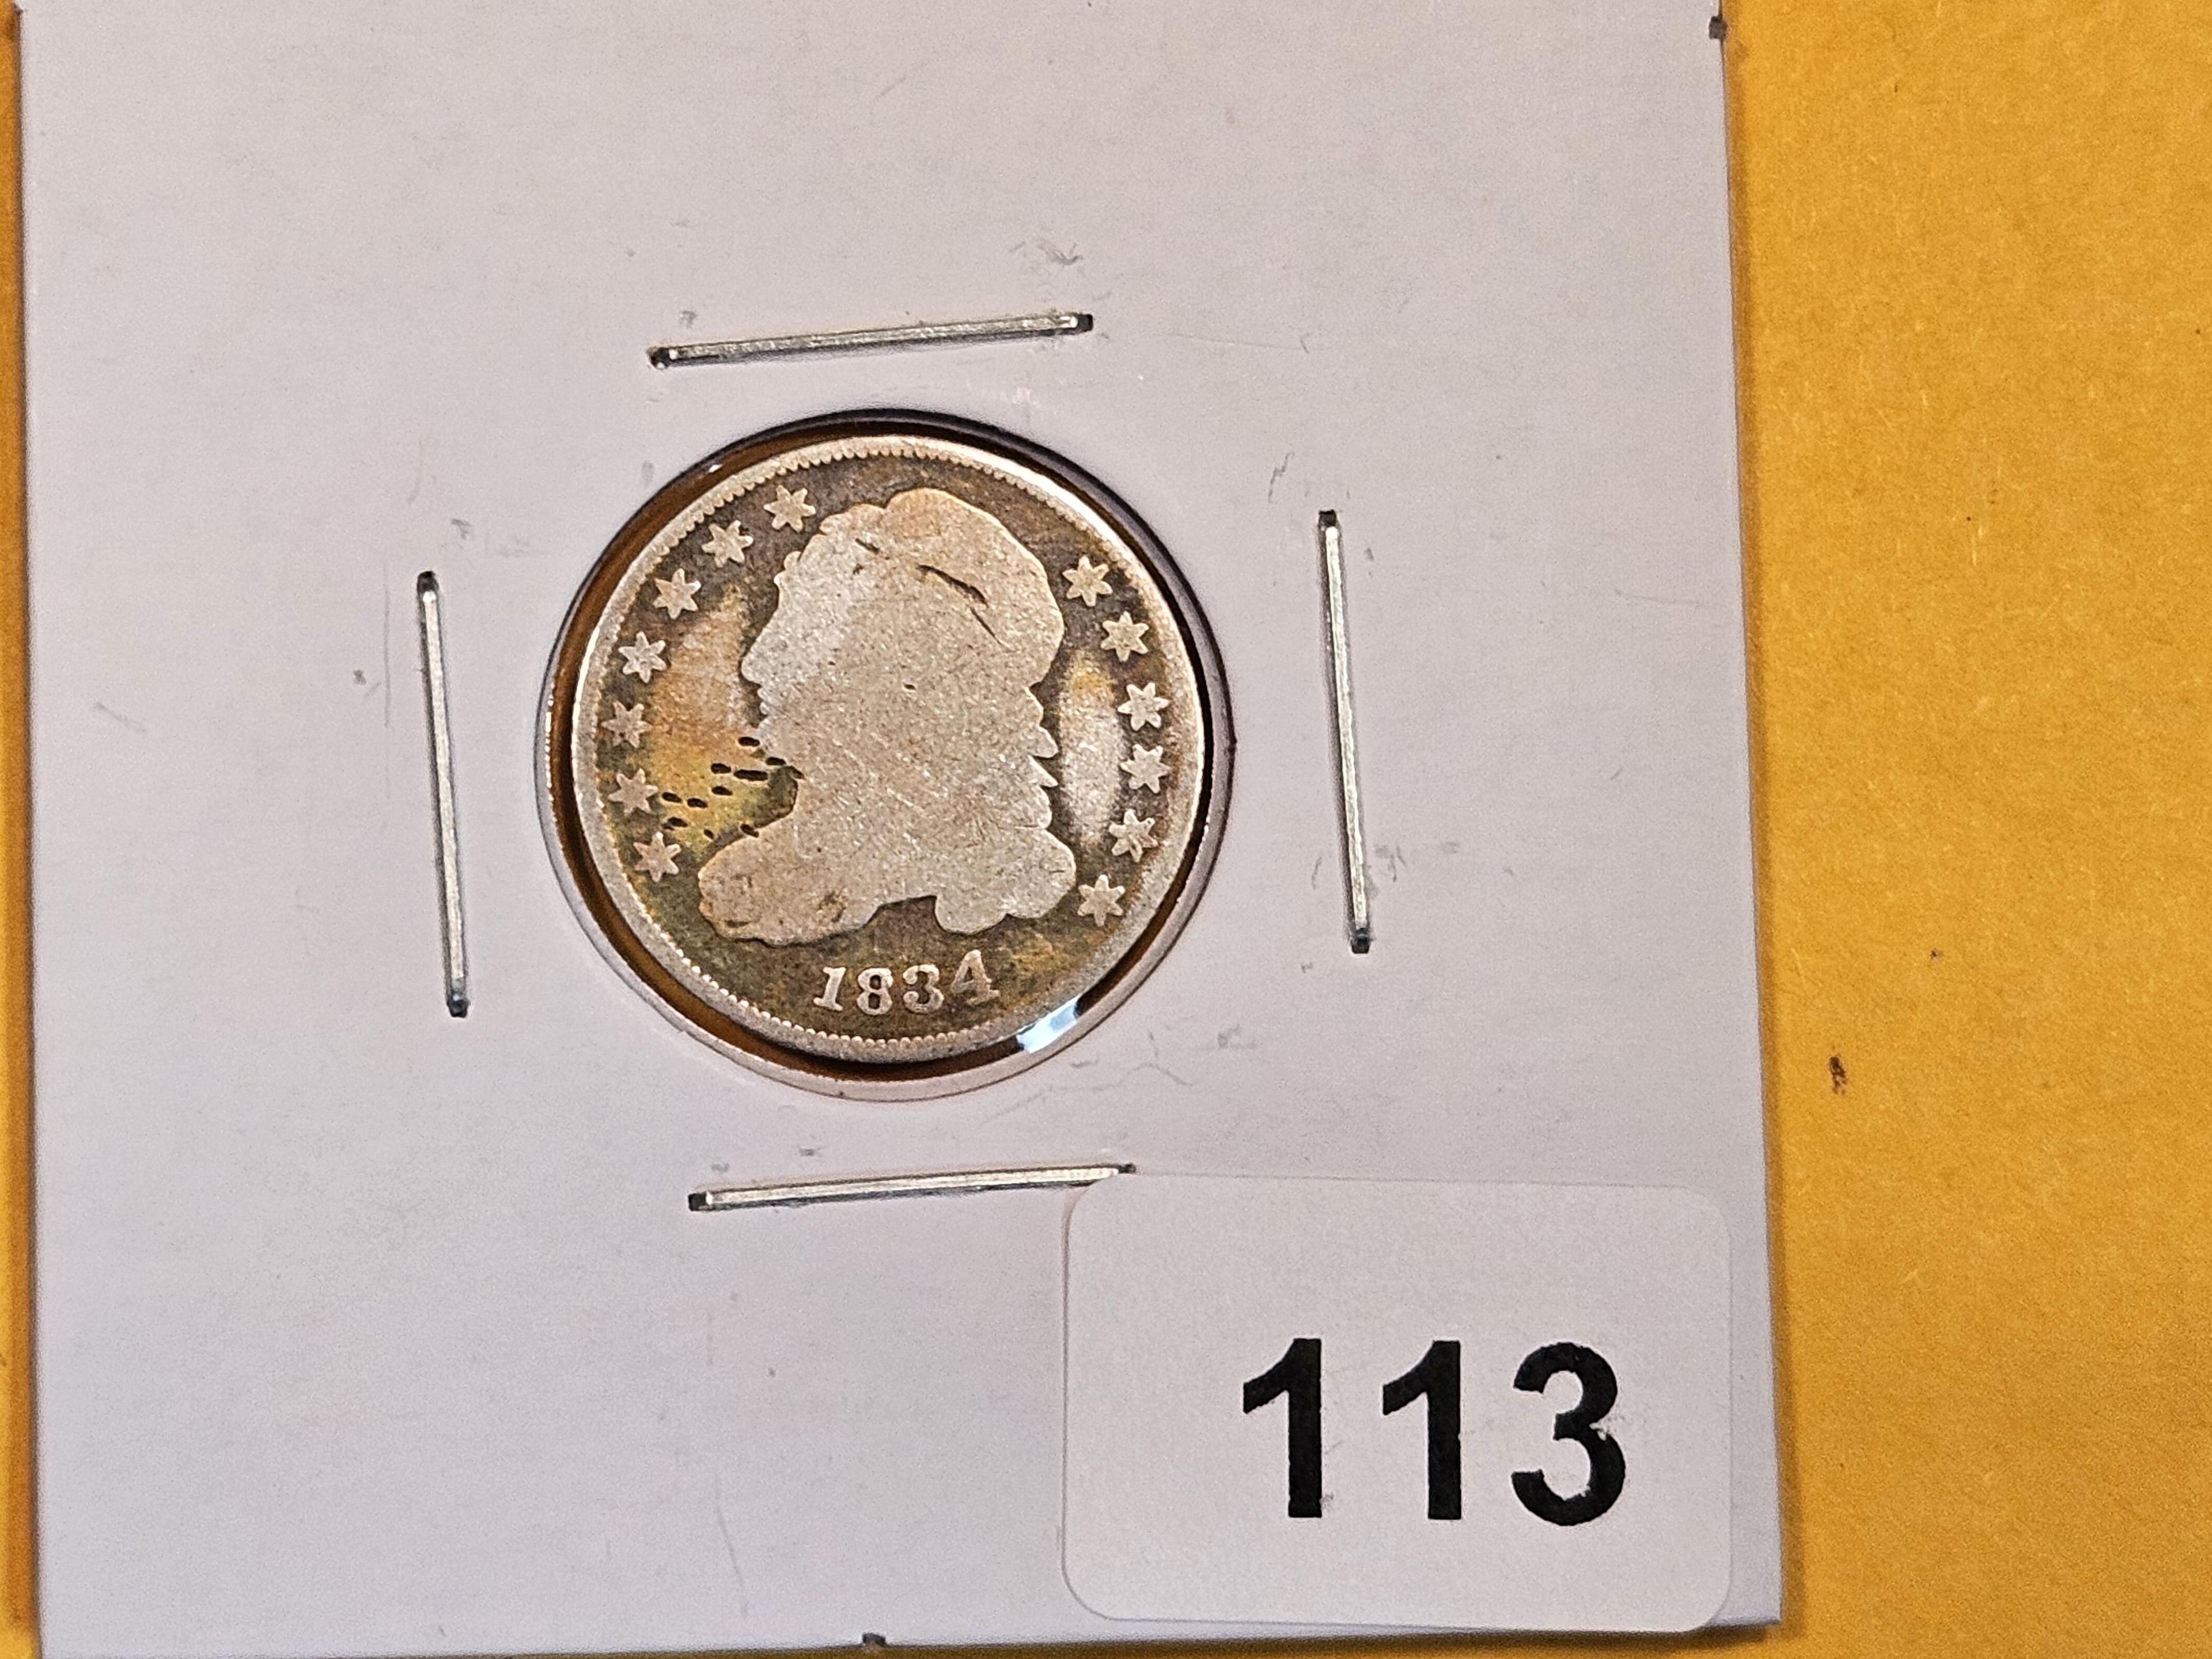 1834 Capped Bust Dime